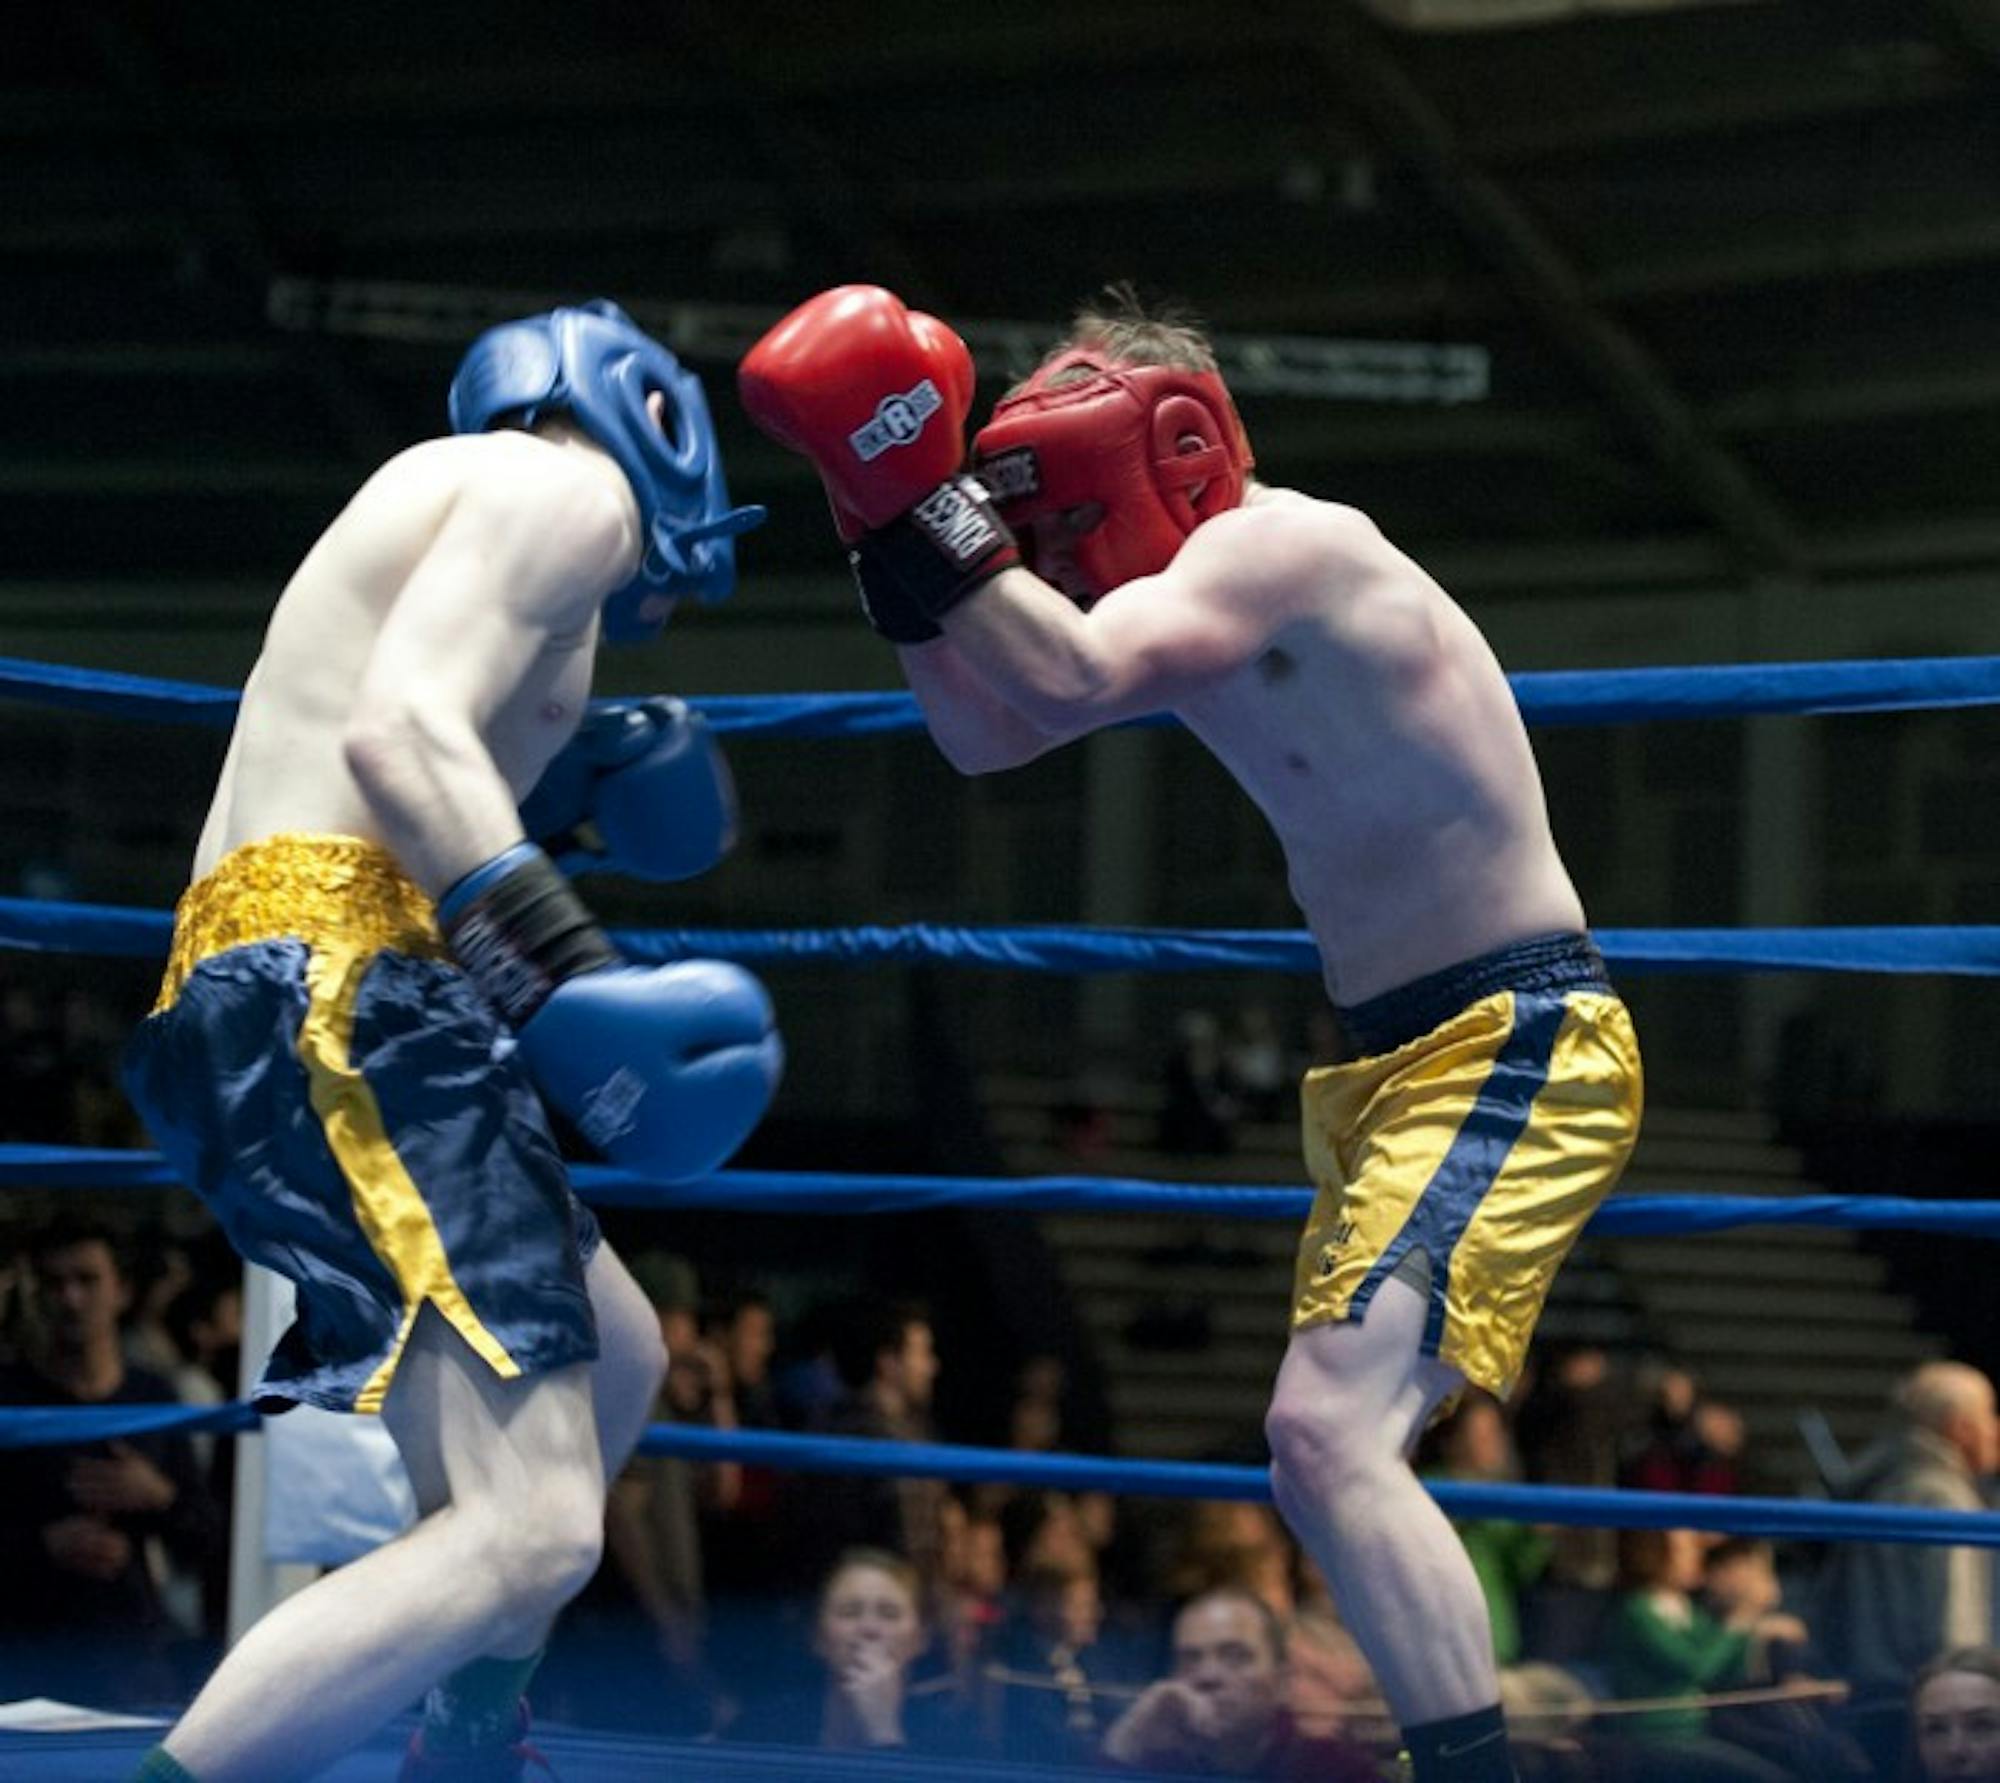 Adam Pasquinelly, right, clinches Ryan Dunn at Sunday night's preliminary bouts.